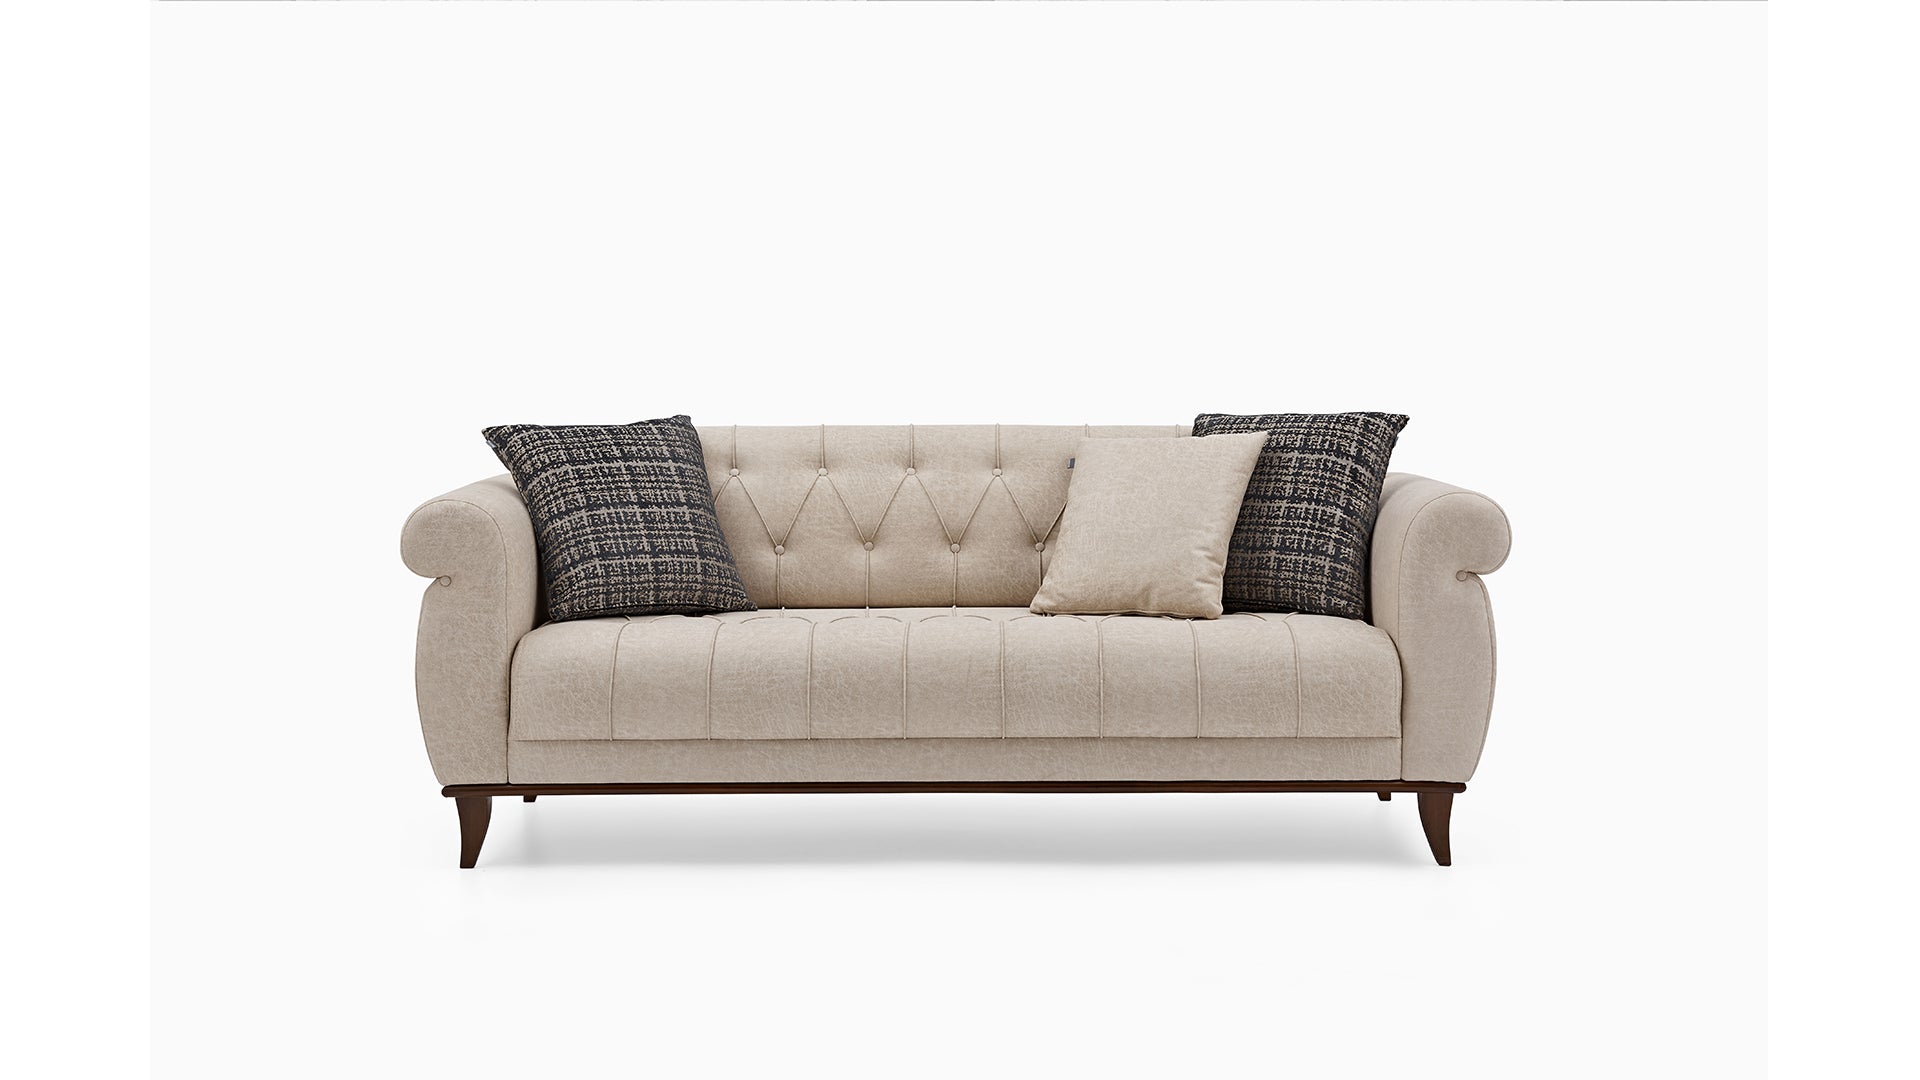 Riviera 2 Seater Sofa Bed